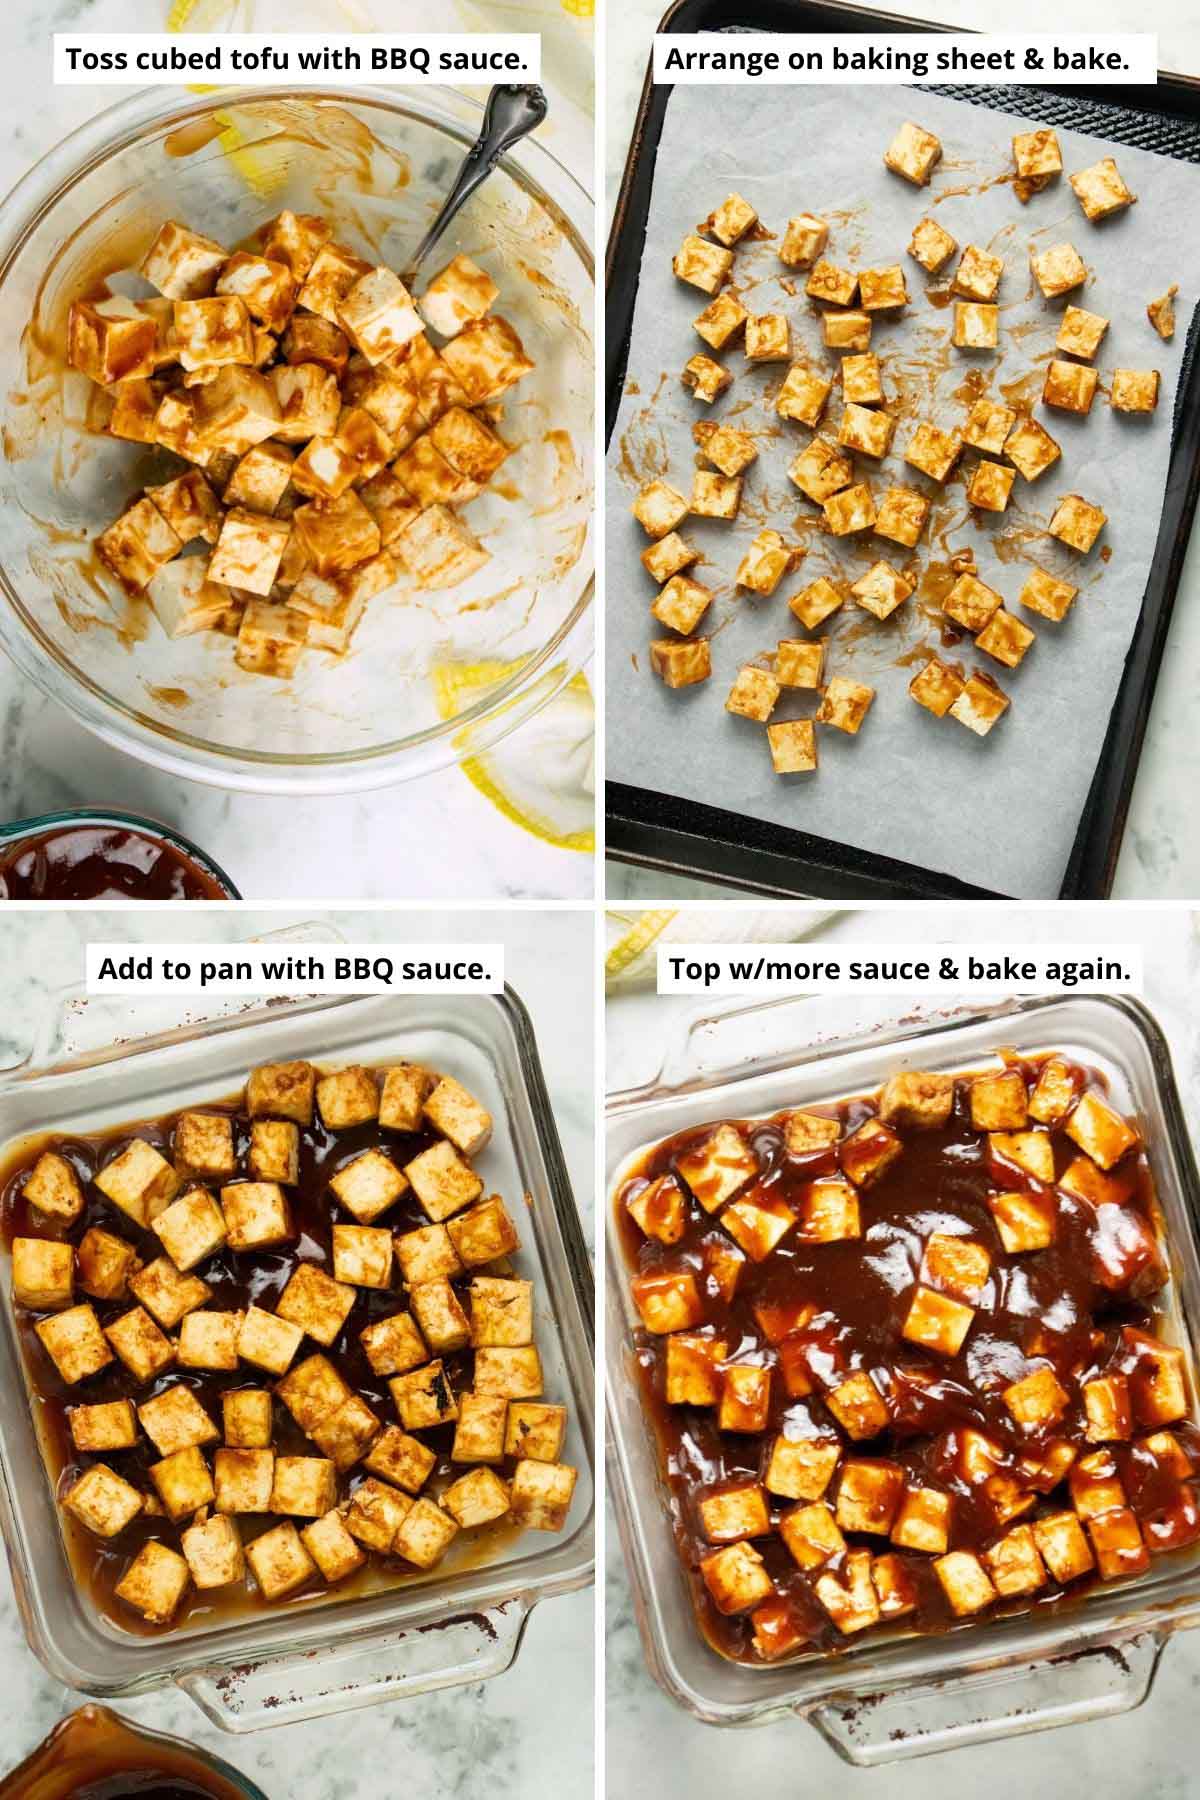 image collage showing the tofu tossed in BBQ sauce and arranged on the baking sheet, tofu in the baking pan with BBQ sauce on the bottom and with BBQ sauce covering it, before baking